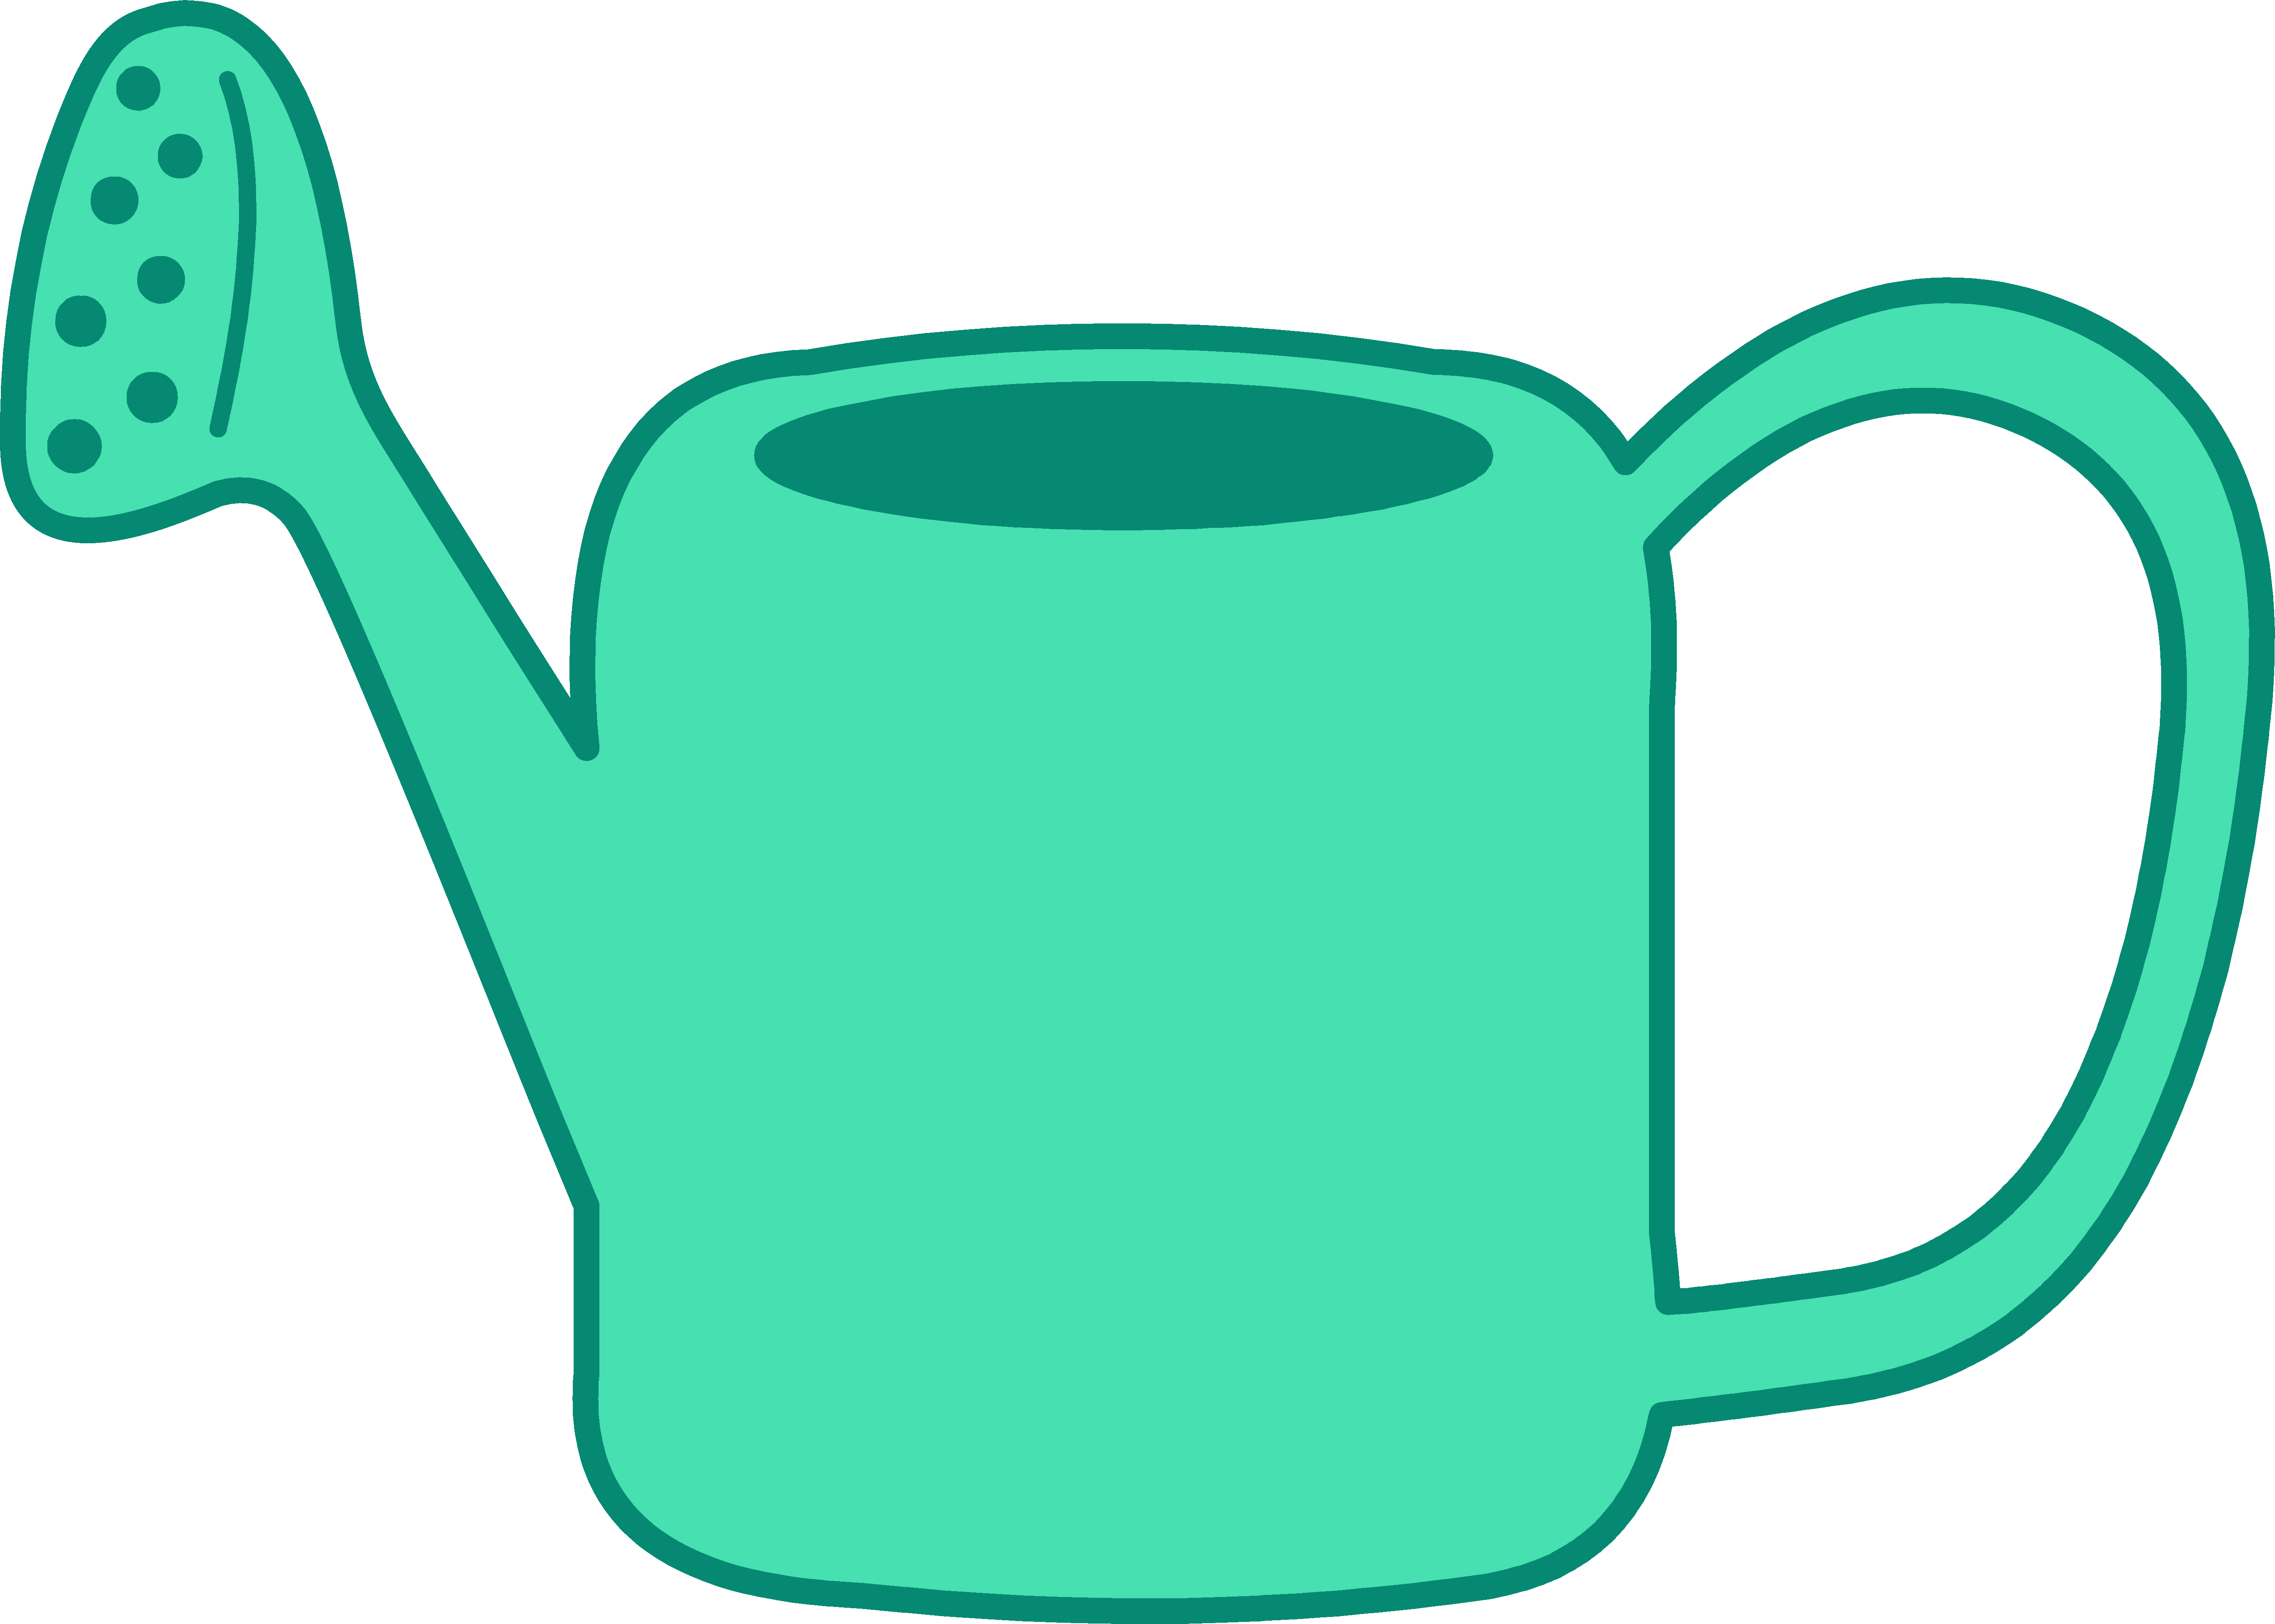 Smiling Watering Can Clip Art